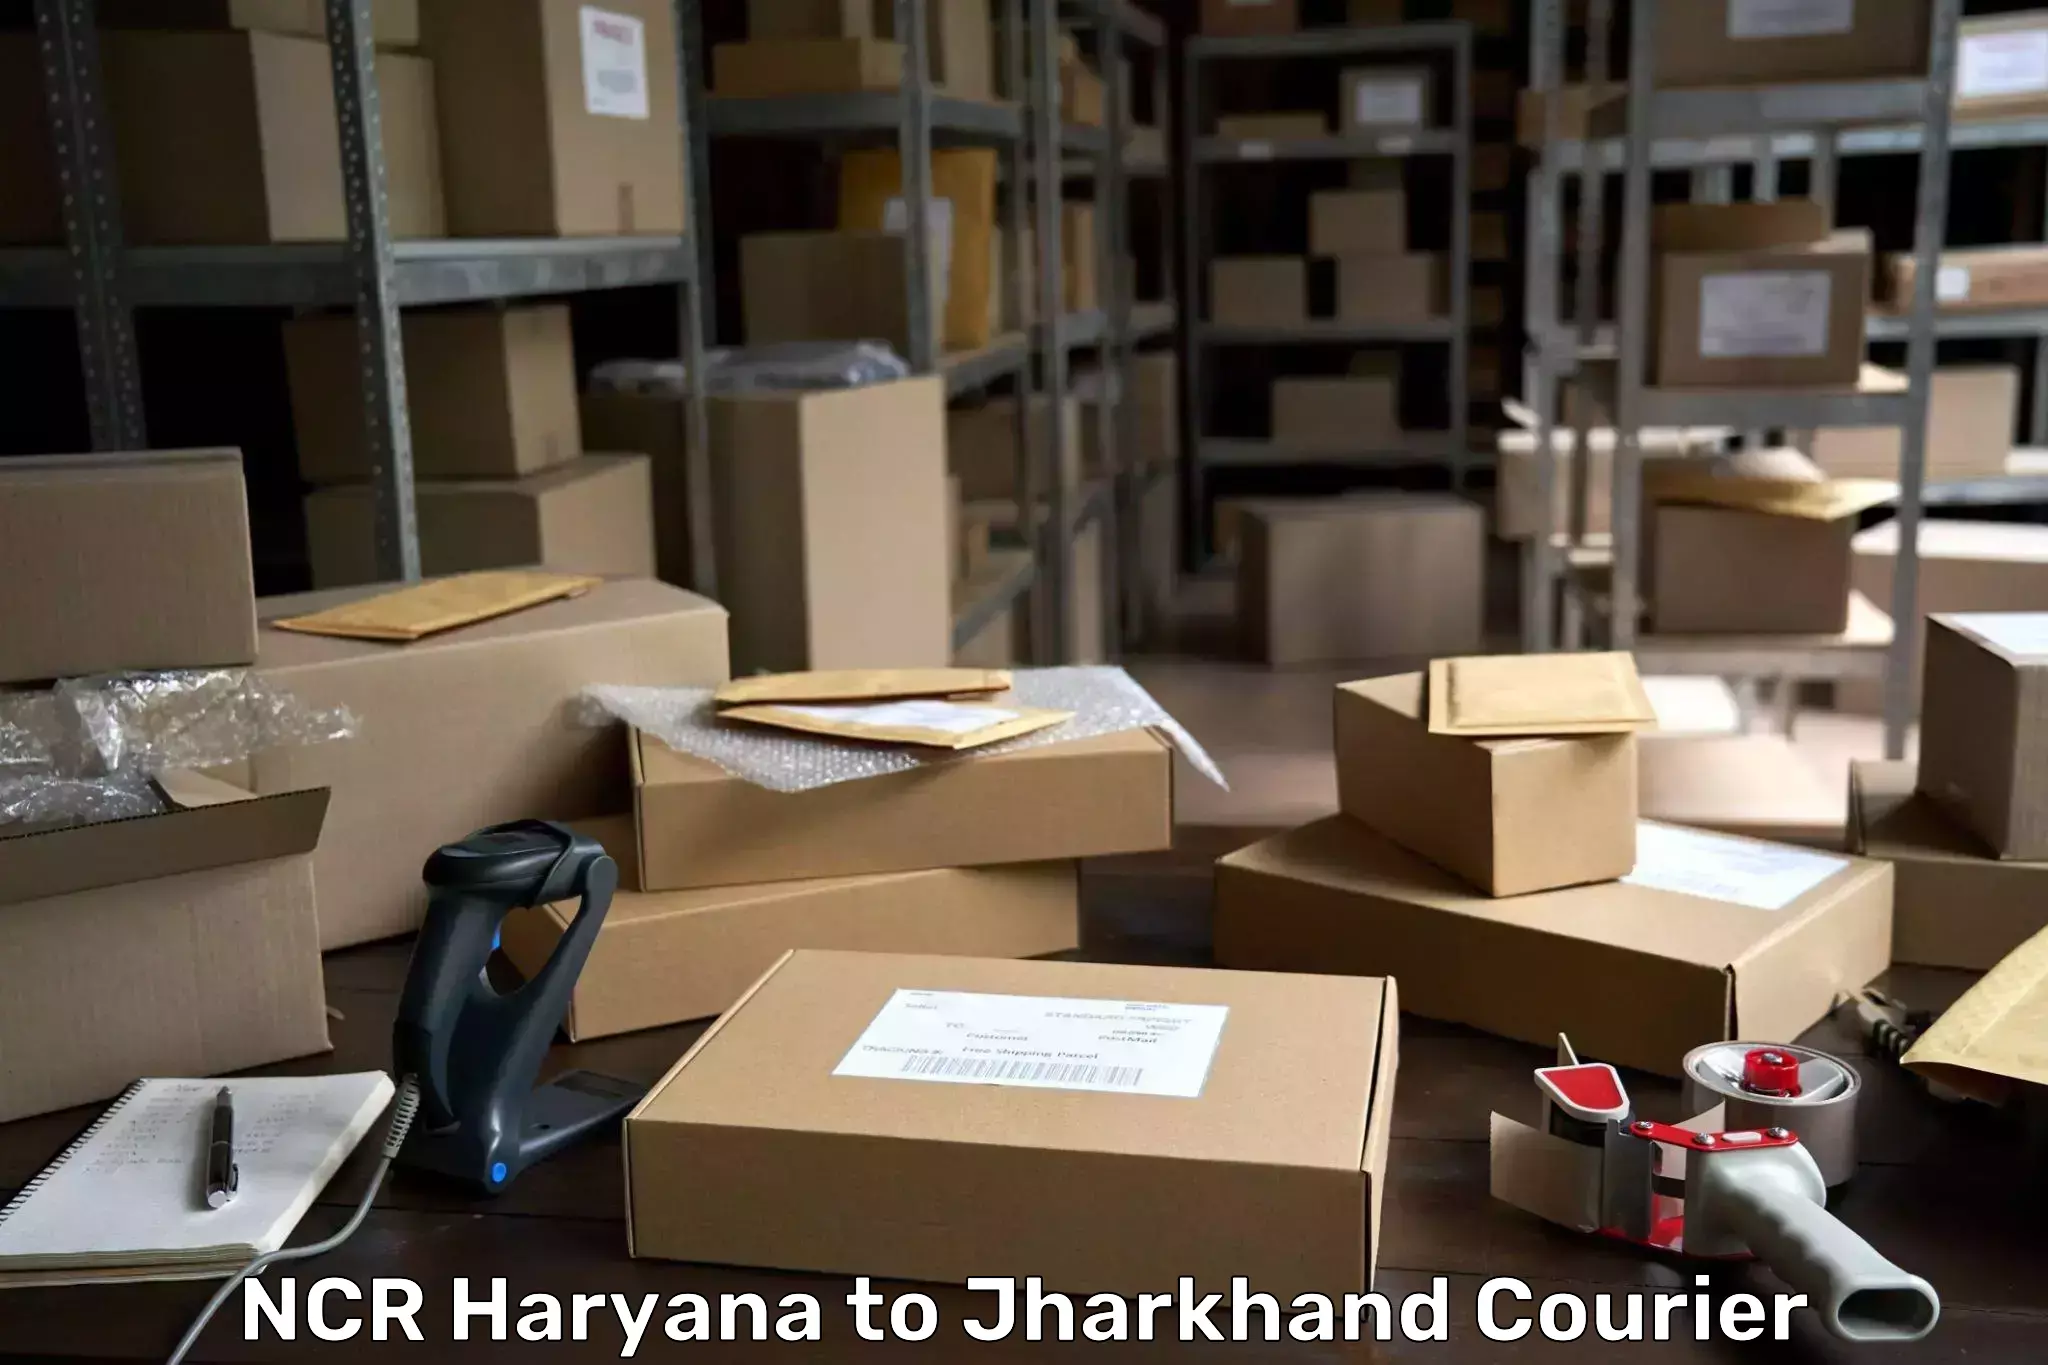 Business delivery service NCR Haryana to Isri